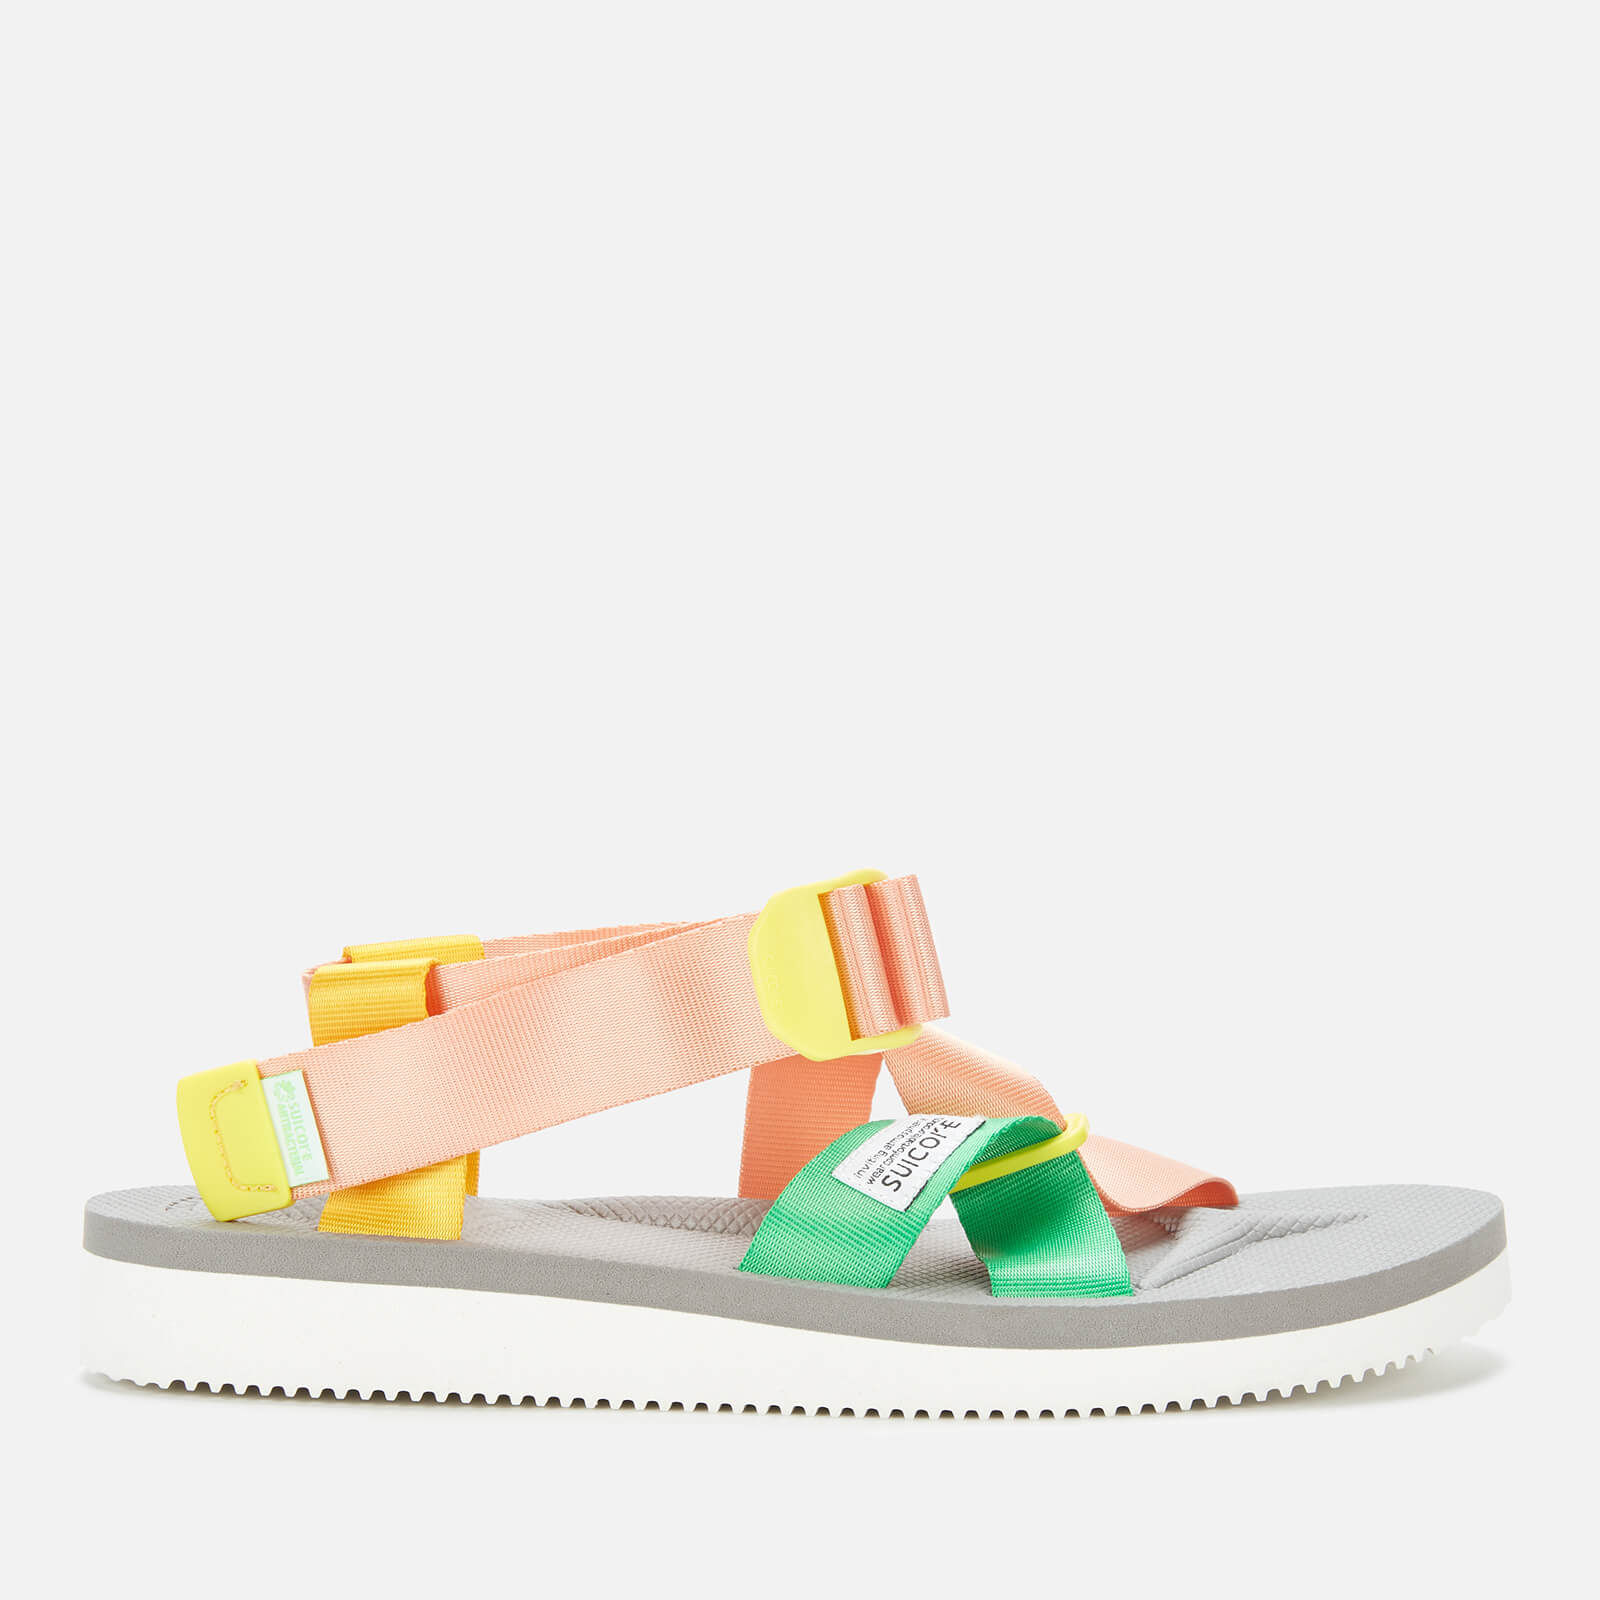 Suicoke Women's Chin-2 Cab Strappy Sandals - Pink/Grey - 3